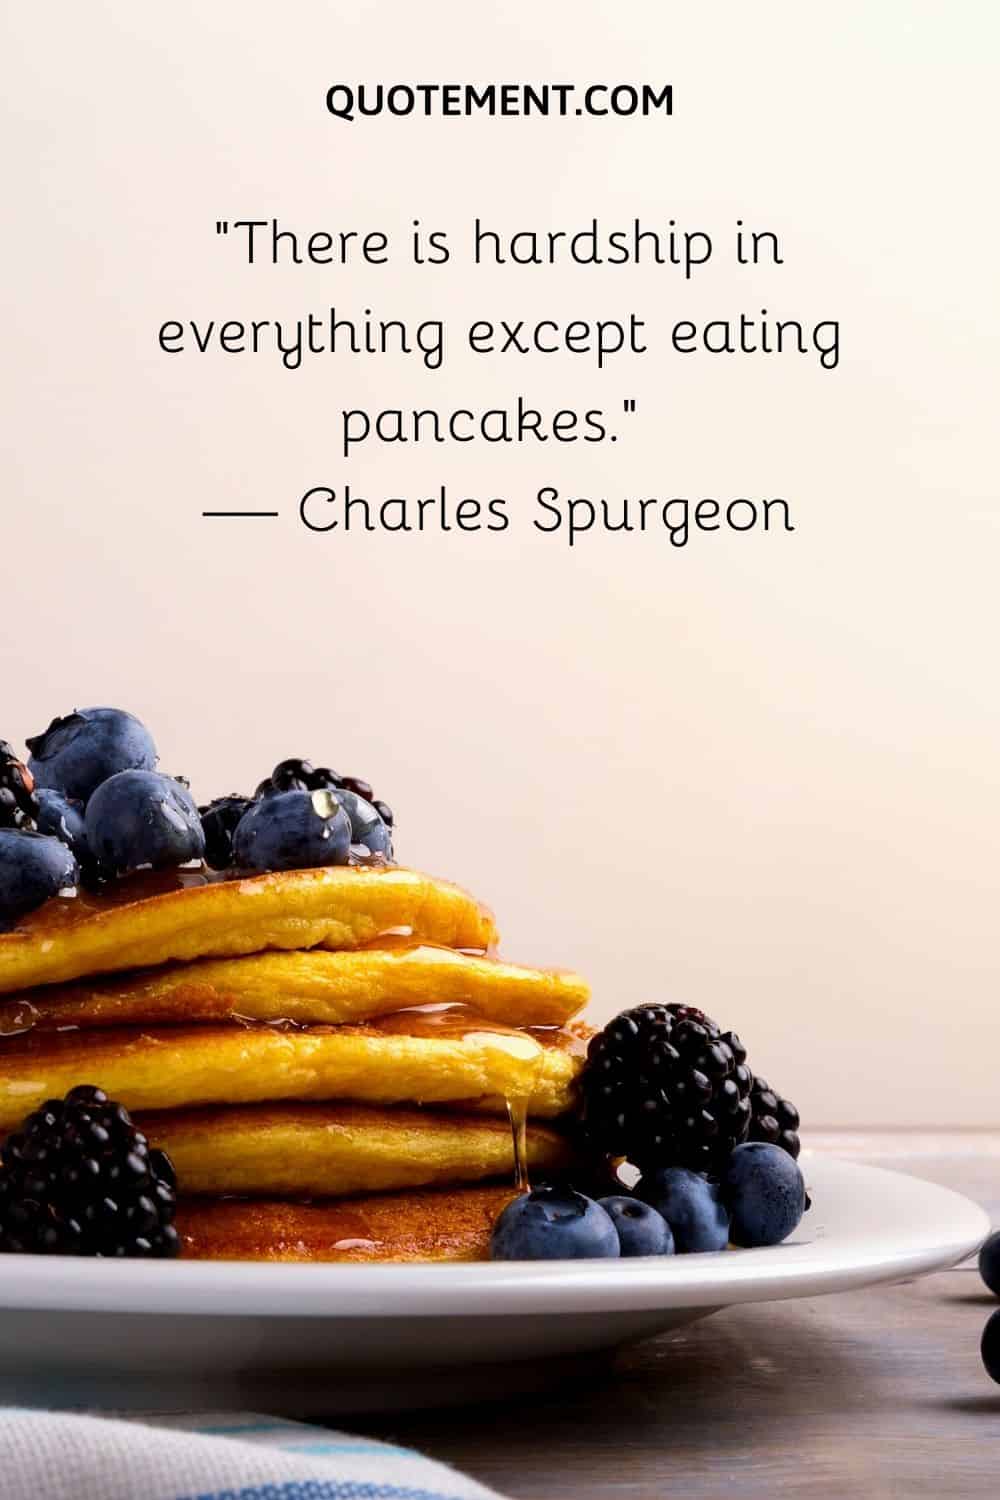 There is hardship in everything except eating pancakes